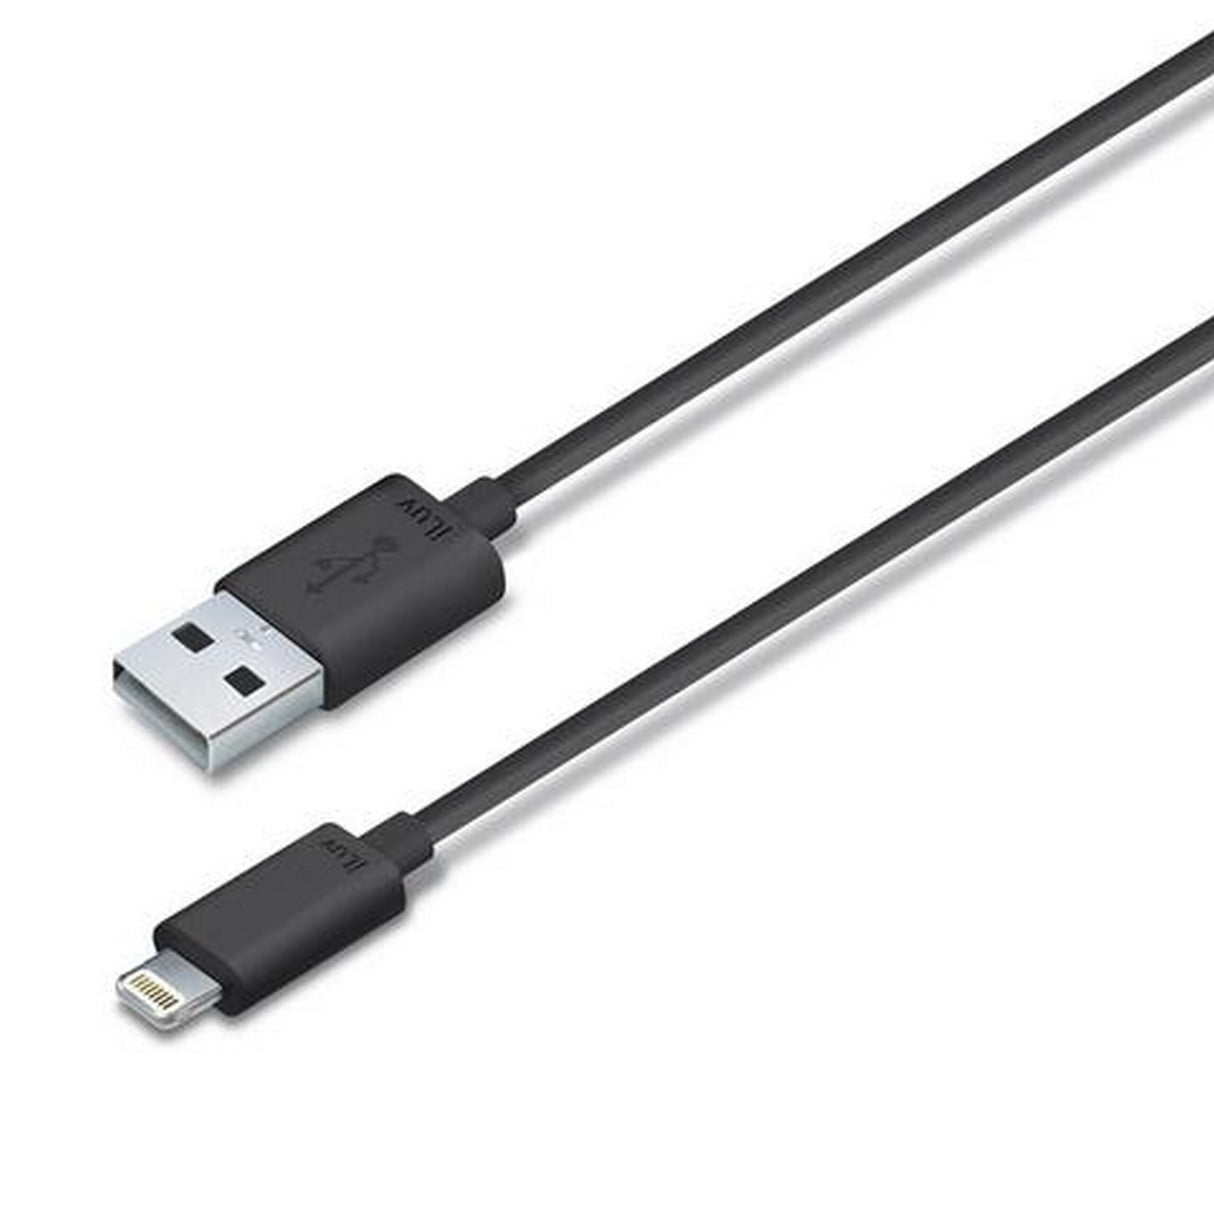 iLuv ICB263BLK 3-Foot High Quality Lightning Cable, Black